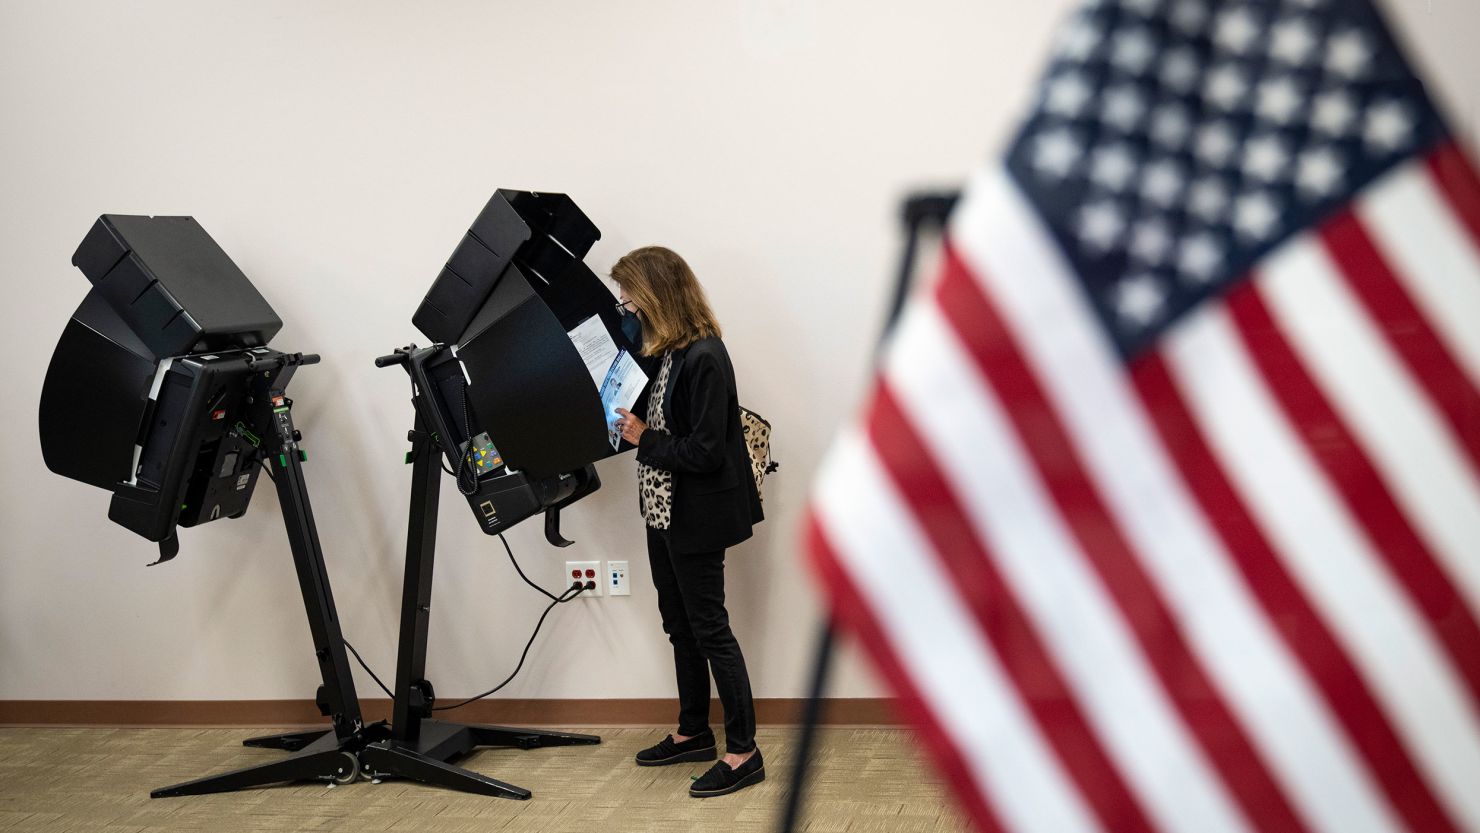 Voters cast their ballots early for the May 3 Primary Election at the Franklin County Board of Elections polling location on April 26, 2022, in Columbus, Ohio. 